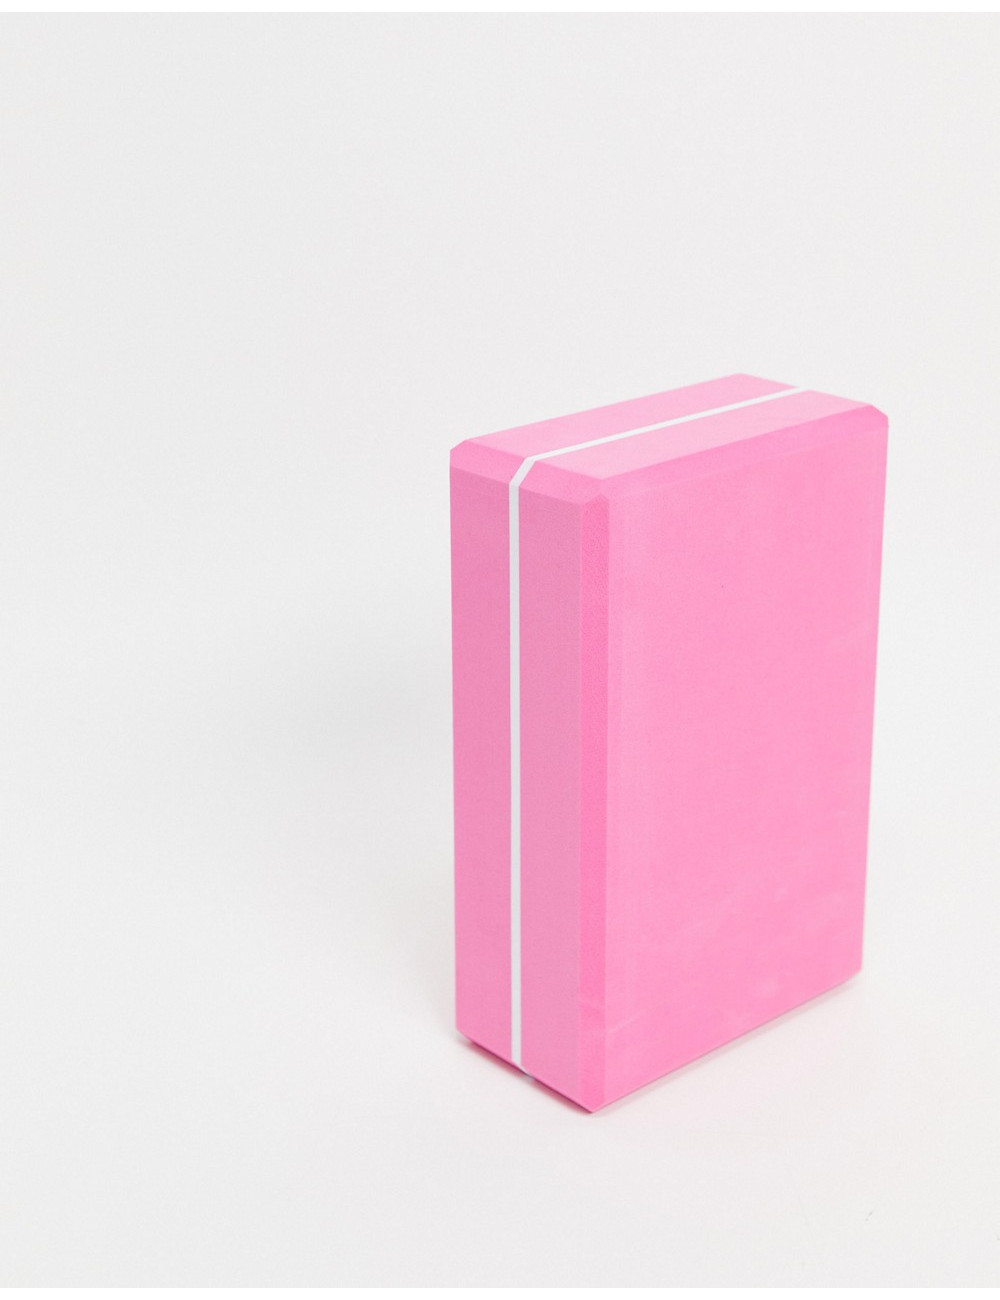 FitHut pilates block in pink